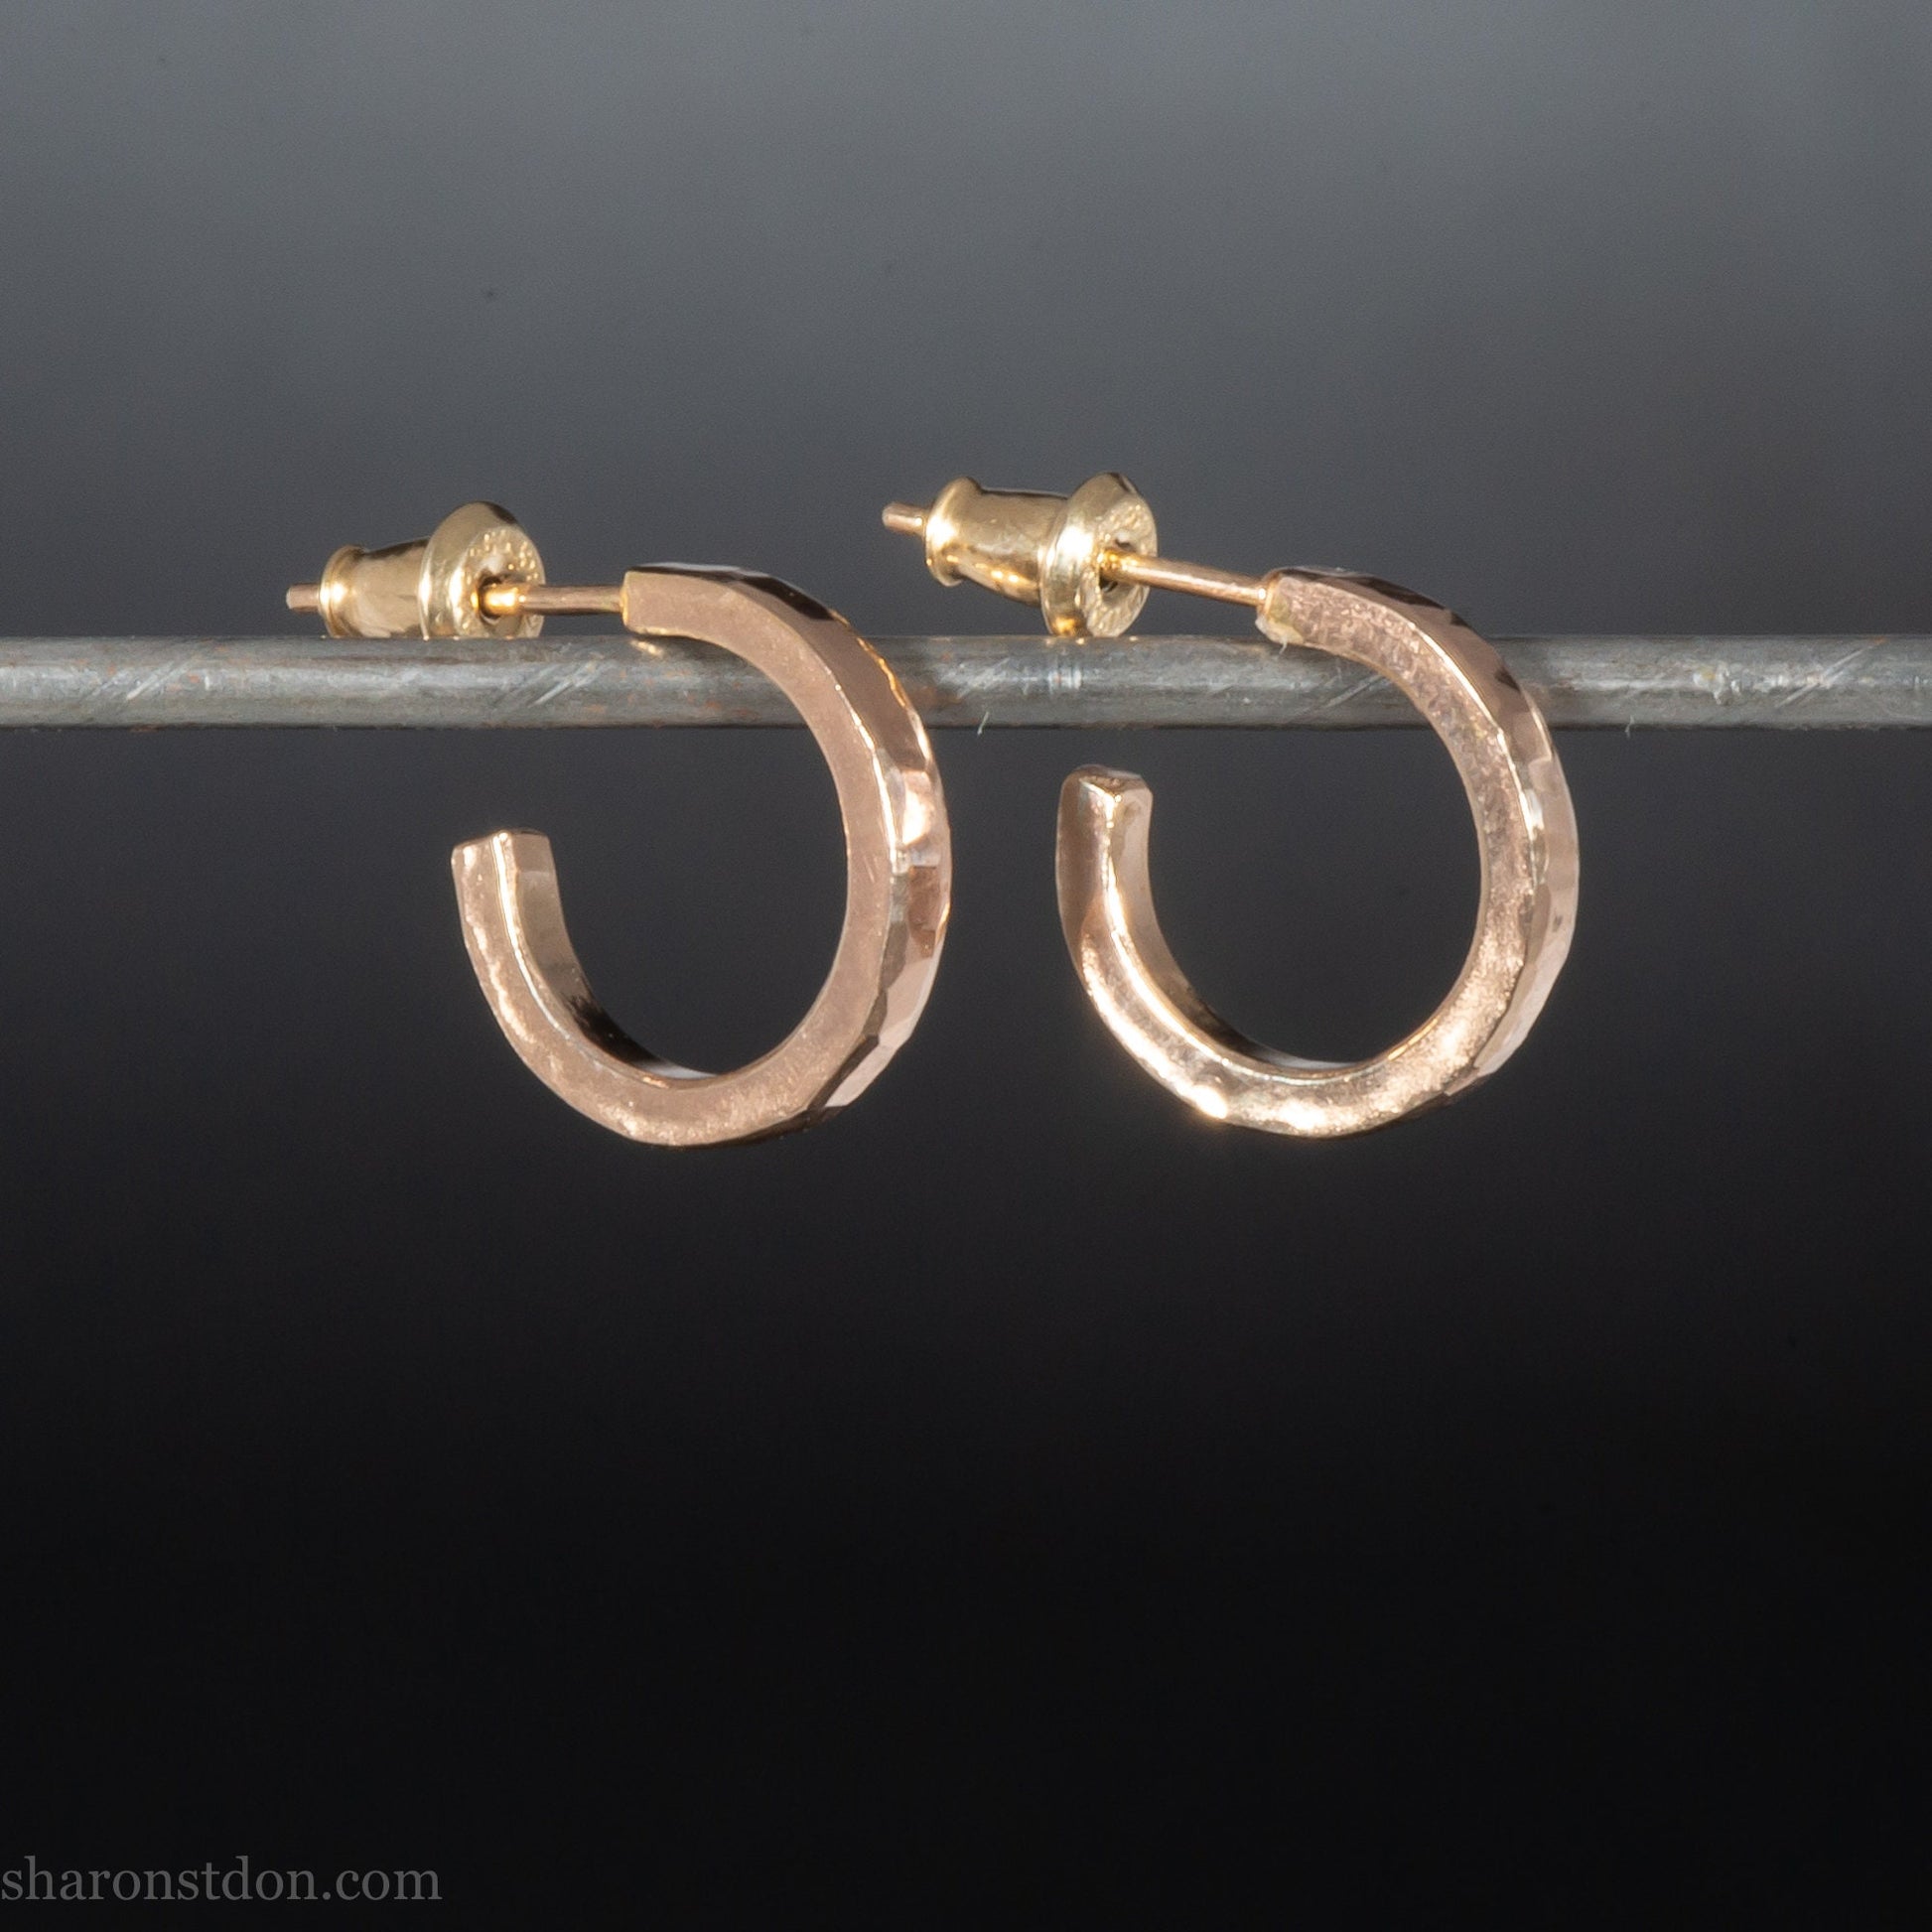 Gold hoop earrings set handmade in North America by Sharon SaintDon. Solid 18k yellow gold, 14mm diameter round with hammered texture.